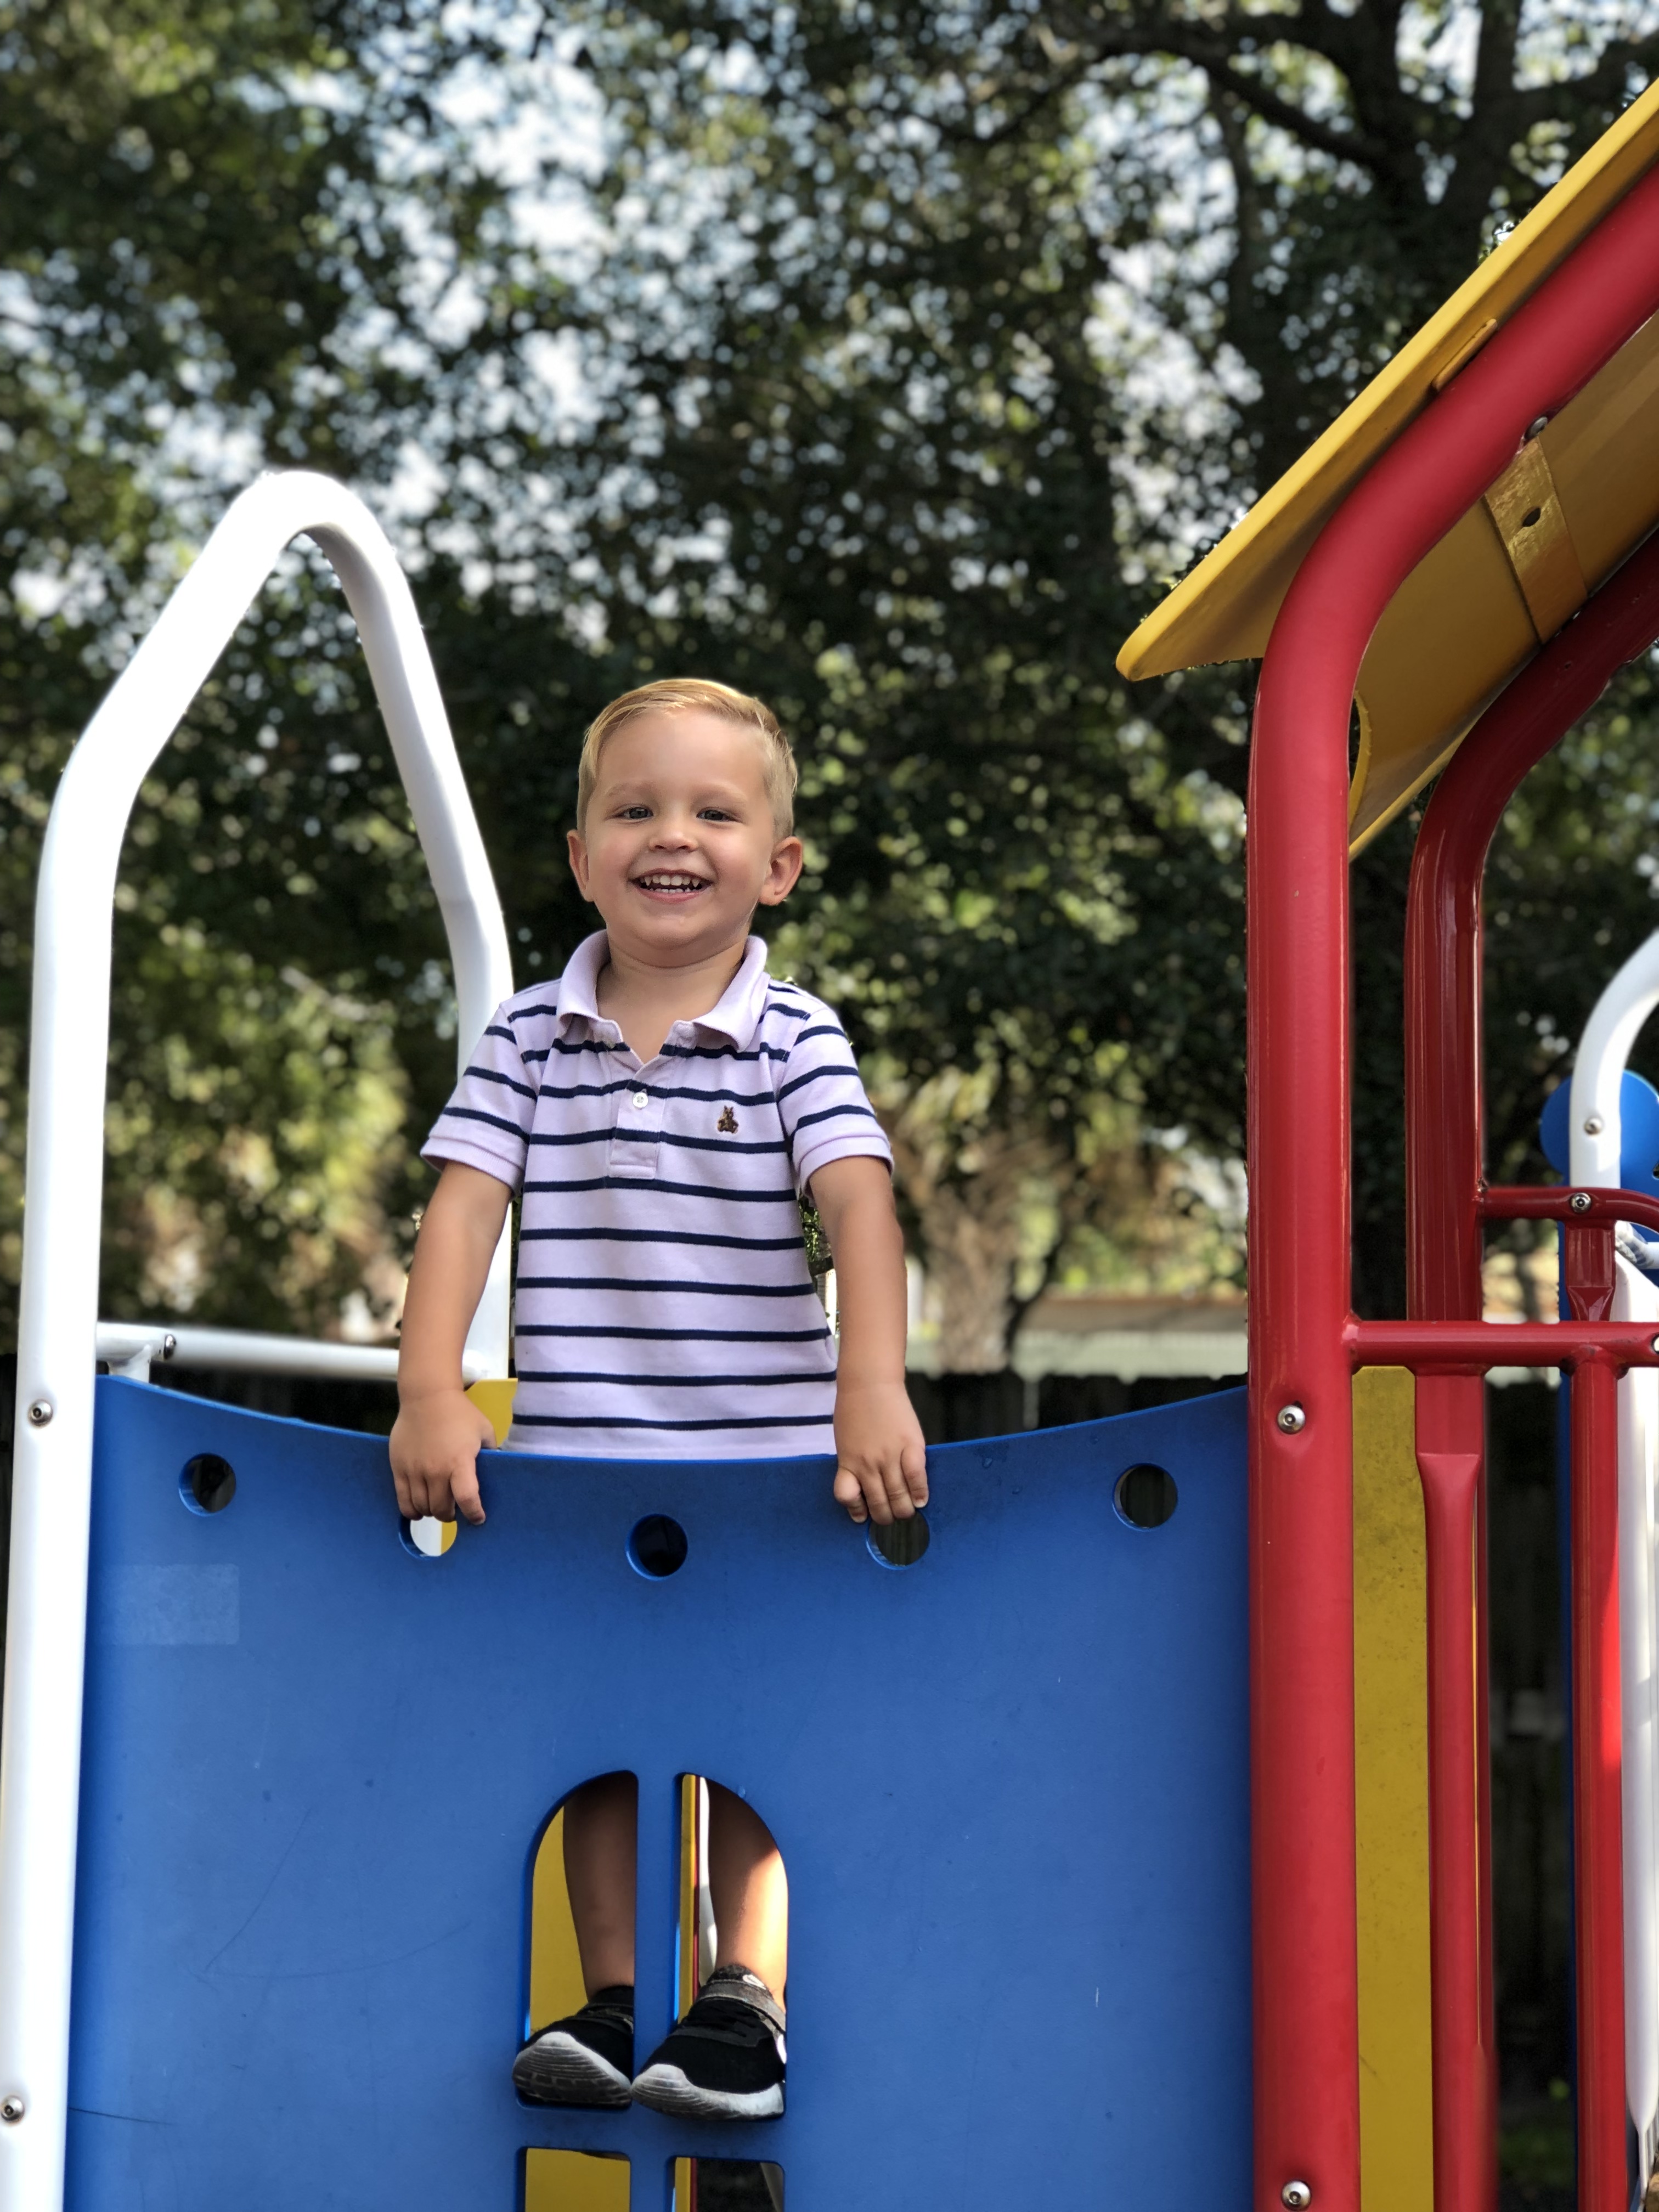 holycross-kid-in-playground-smiling